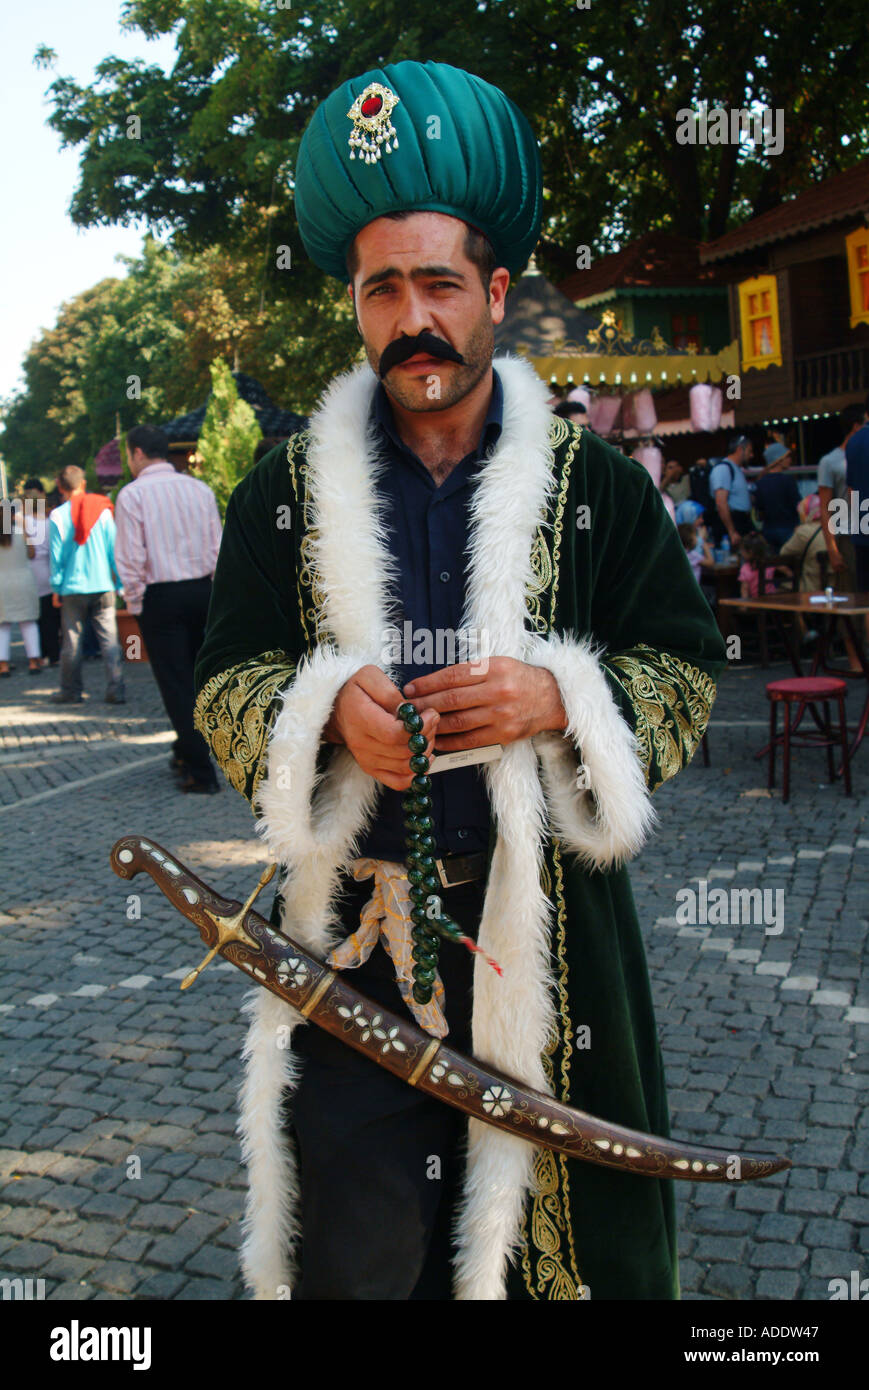 TURKISH MAN IN TRADITIONAL OTTOMAN COSTUME IN THE TOURISTIC DISTRICT OF  ISTANBUL SULTANAHMET JULY 2004 TURKEY Stock Photo - Alamy